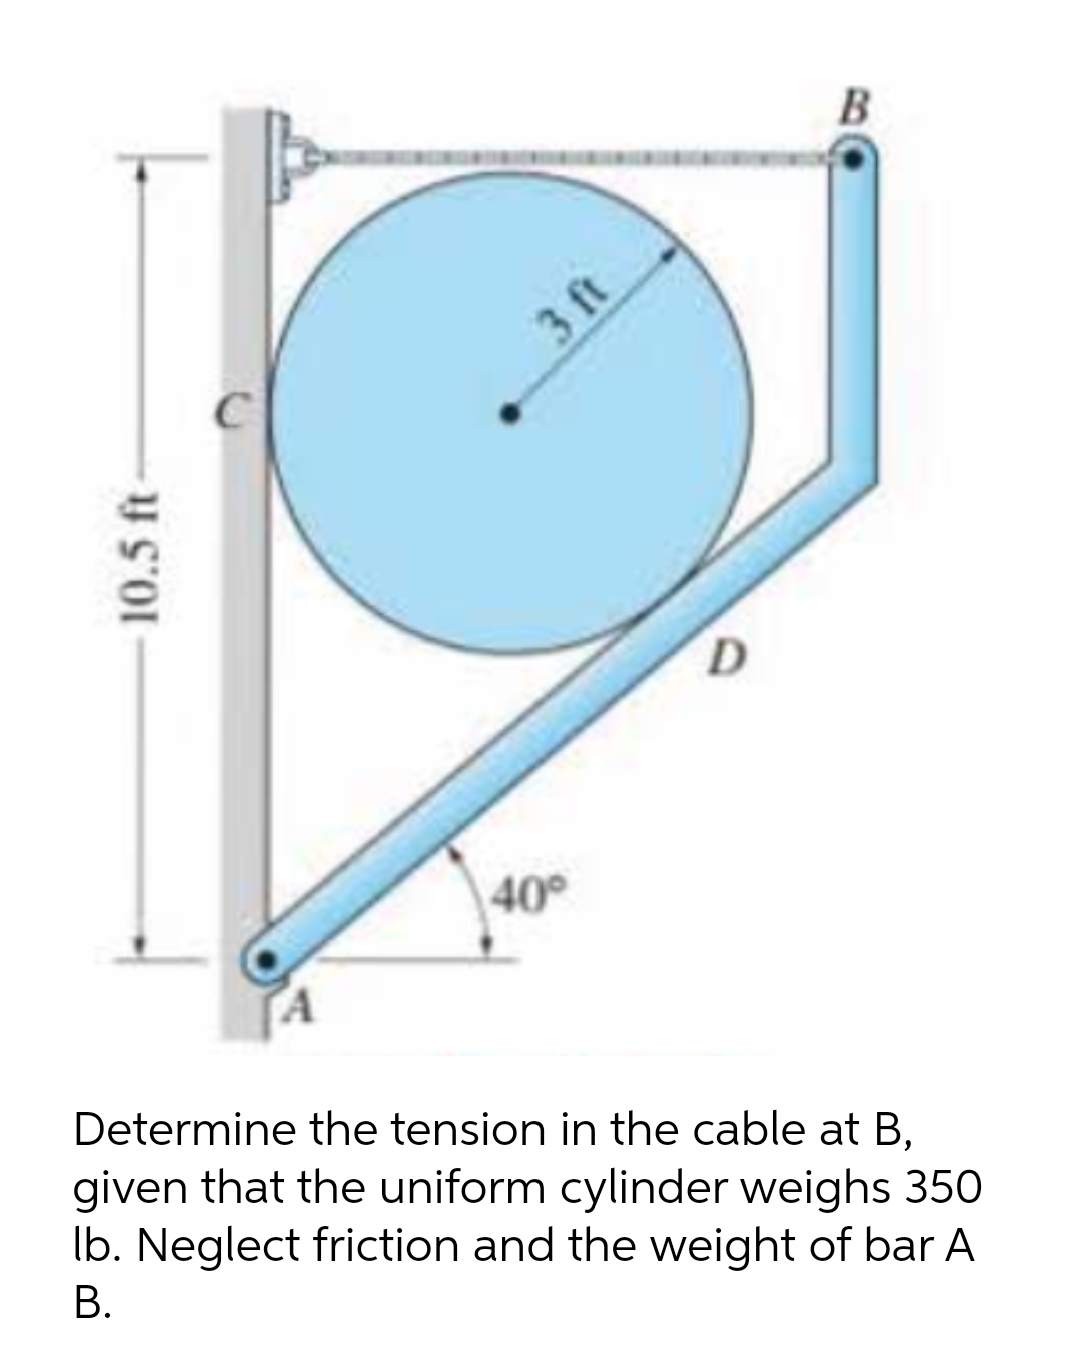 3 ft
D.
40°
Determine the tension in the cable at B,
given that the uniform cylinder weighs 350
lb. Neglect friction and the weight of bar A
В.
10.5 ft
